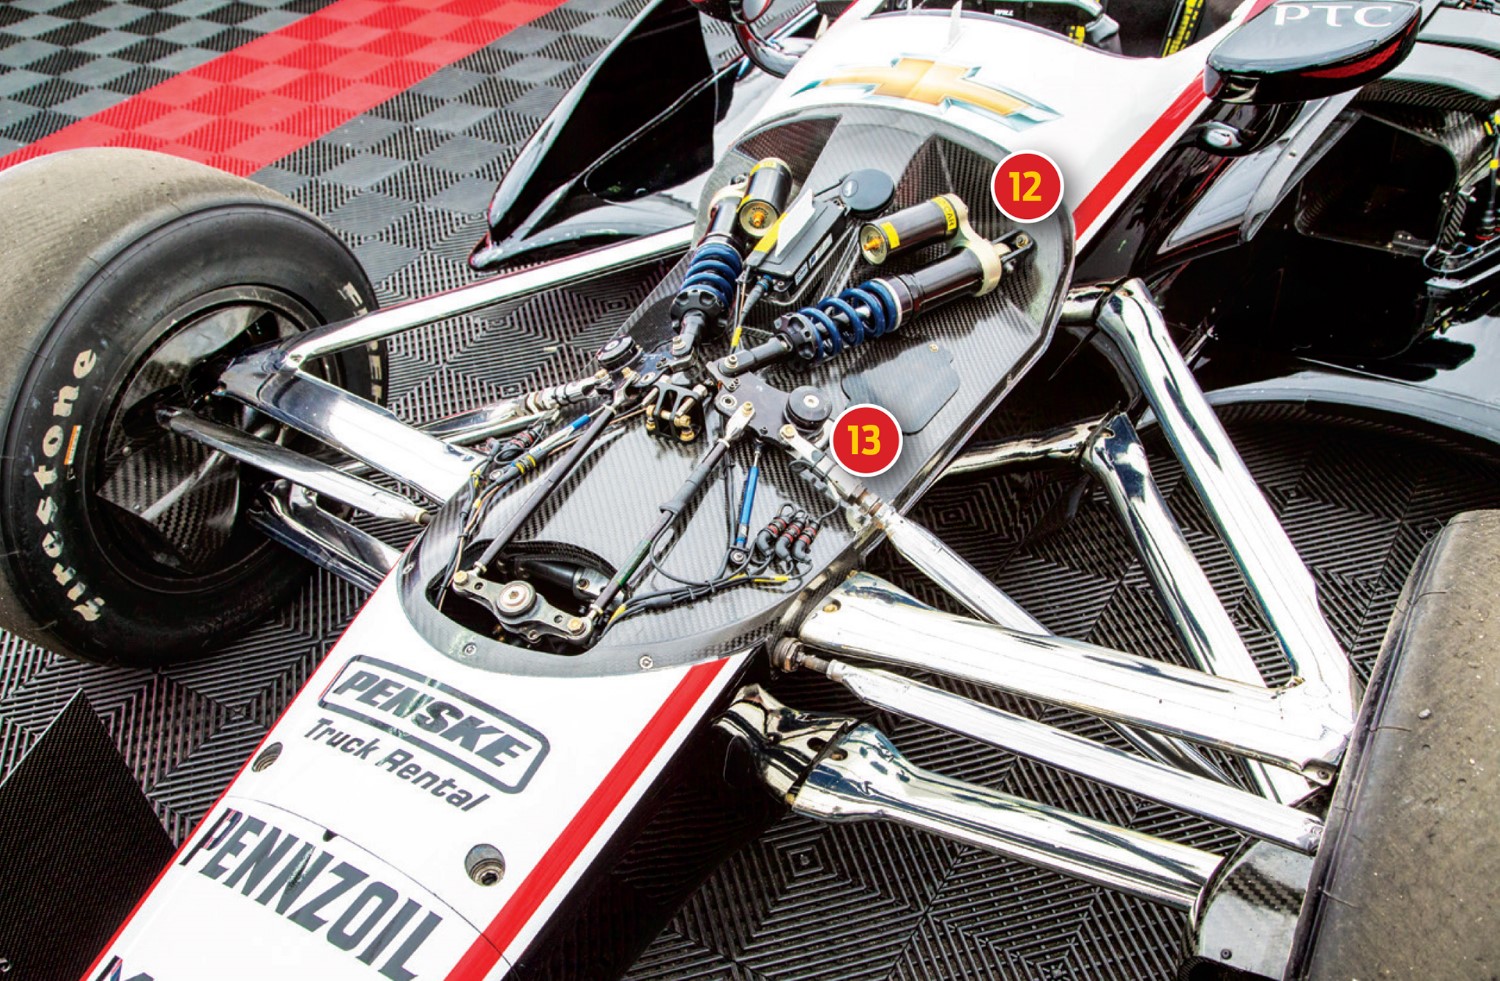 IndyCar front suspension layout